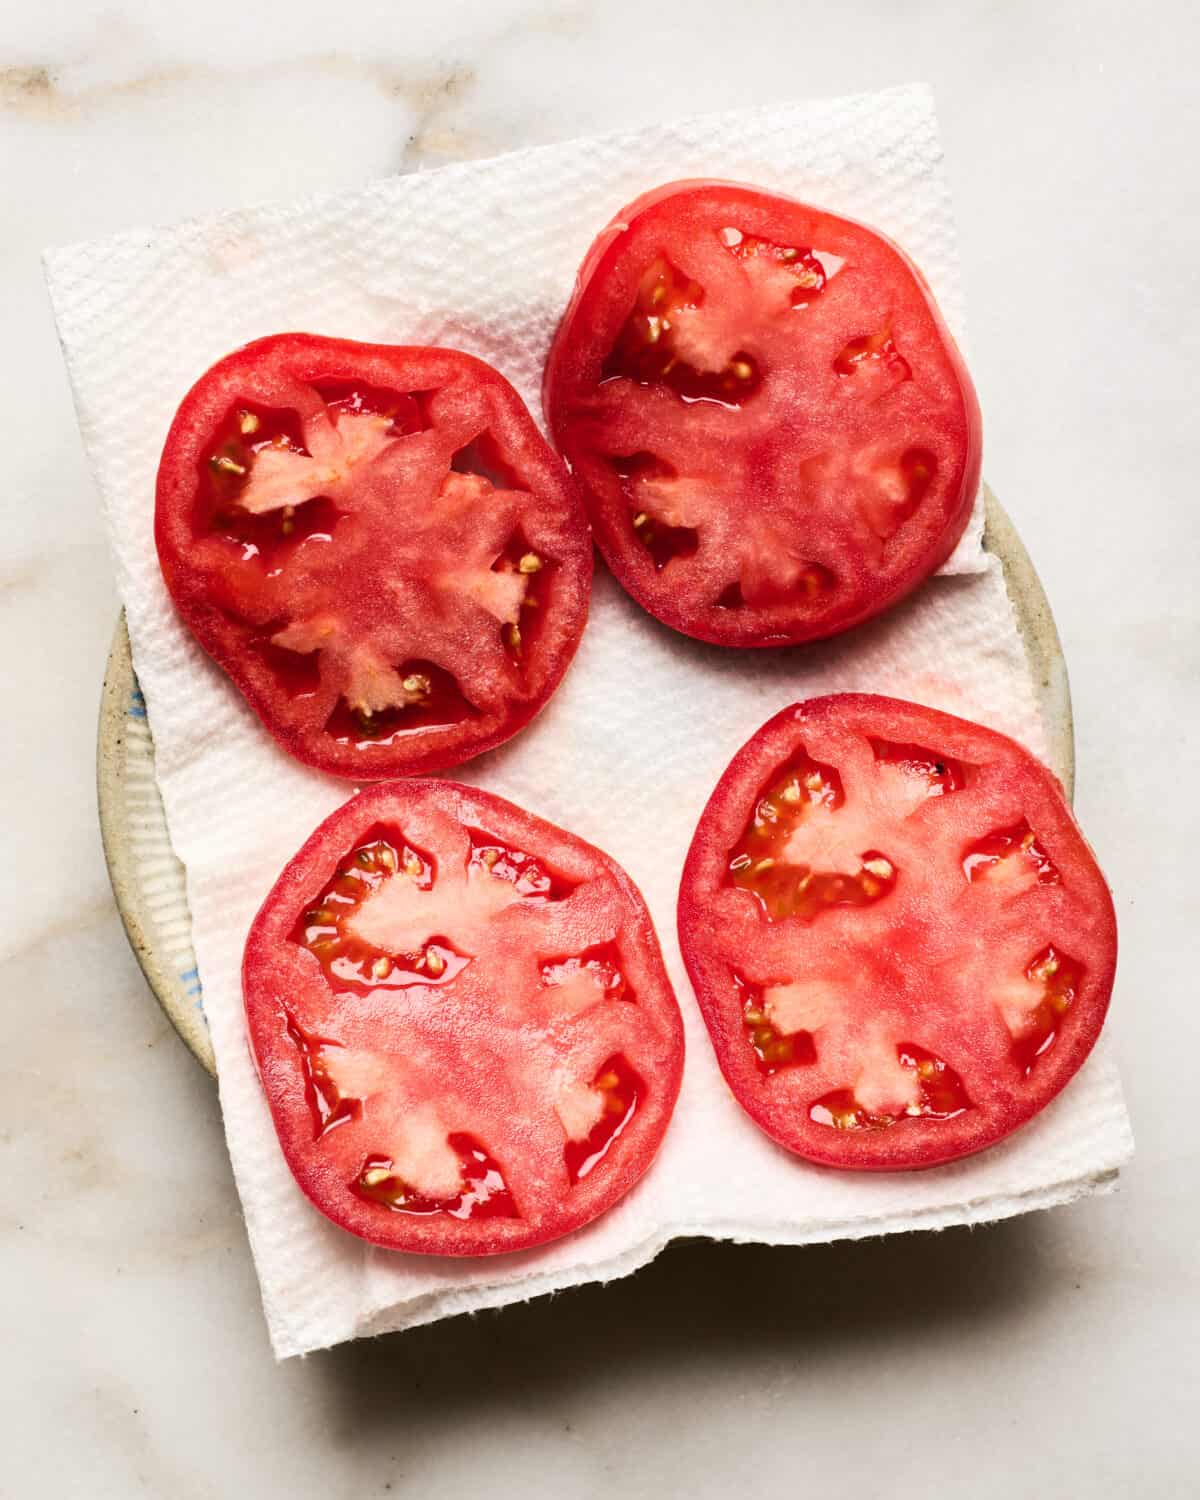 Tomato slices on a bed of paper towels. 